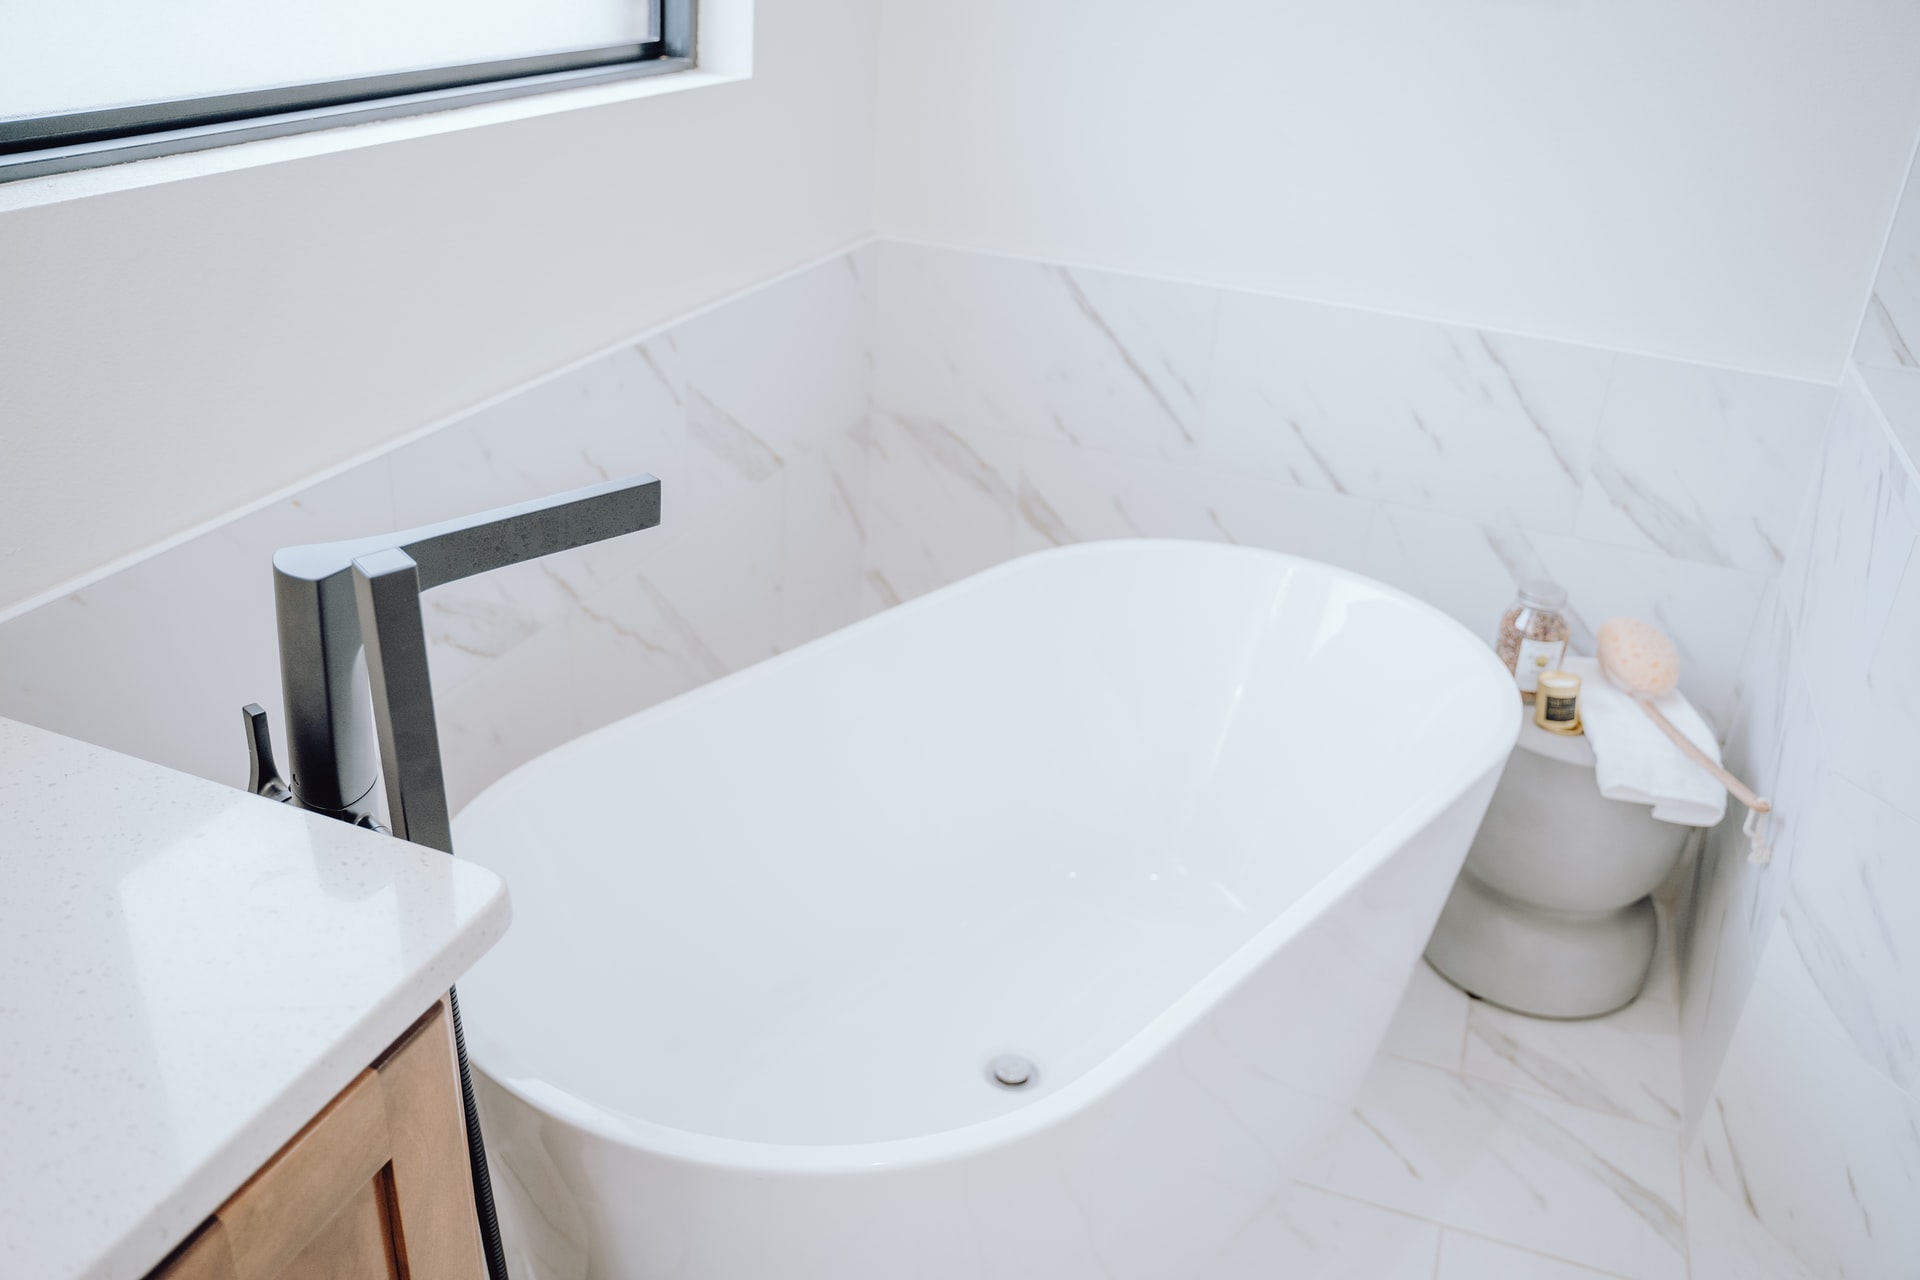 What To Do If Your Bathtub Won’t Drain?